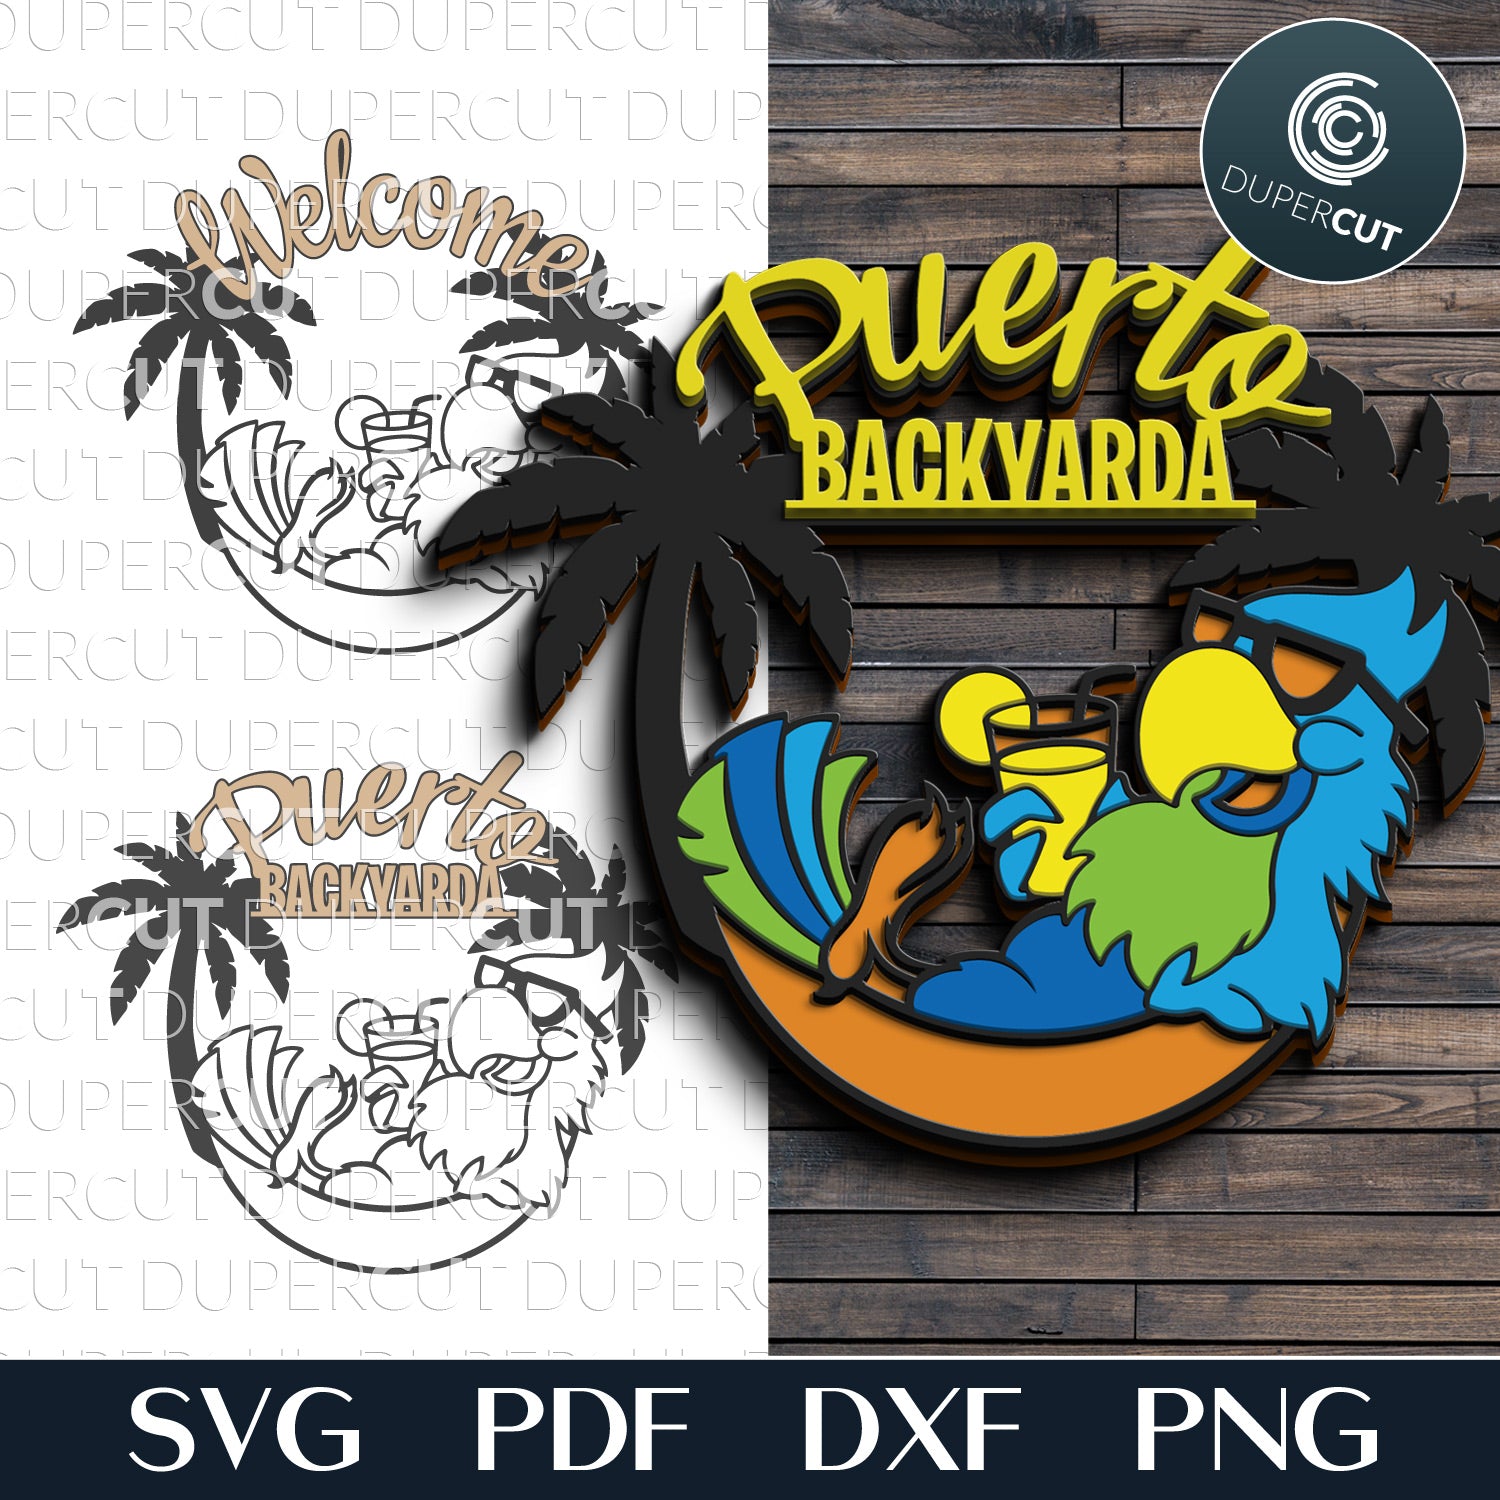 Puerto Backyarda welcome sign - funny parrot in hammock with a drink - SVG DXF vector layered laser cutting files for Glowforge, Cricut, Silhouette, CNC plasma machines by www.DuperCut.com